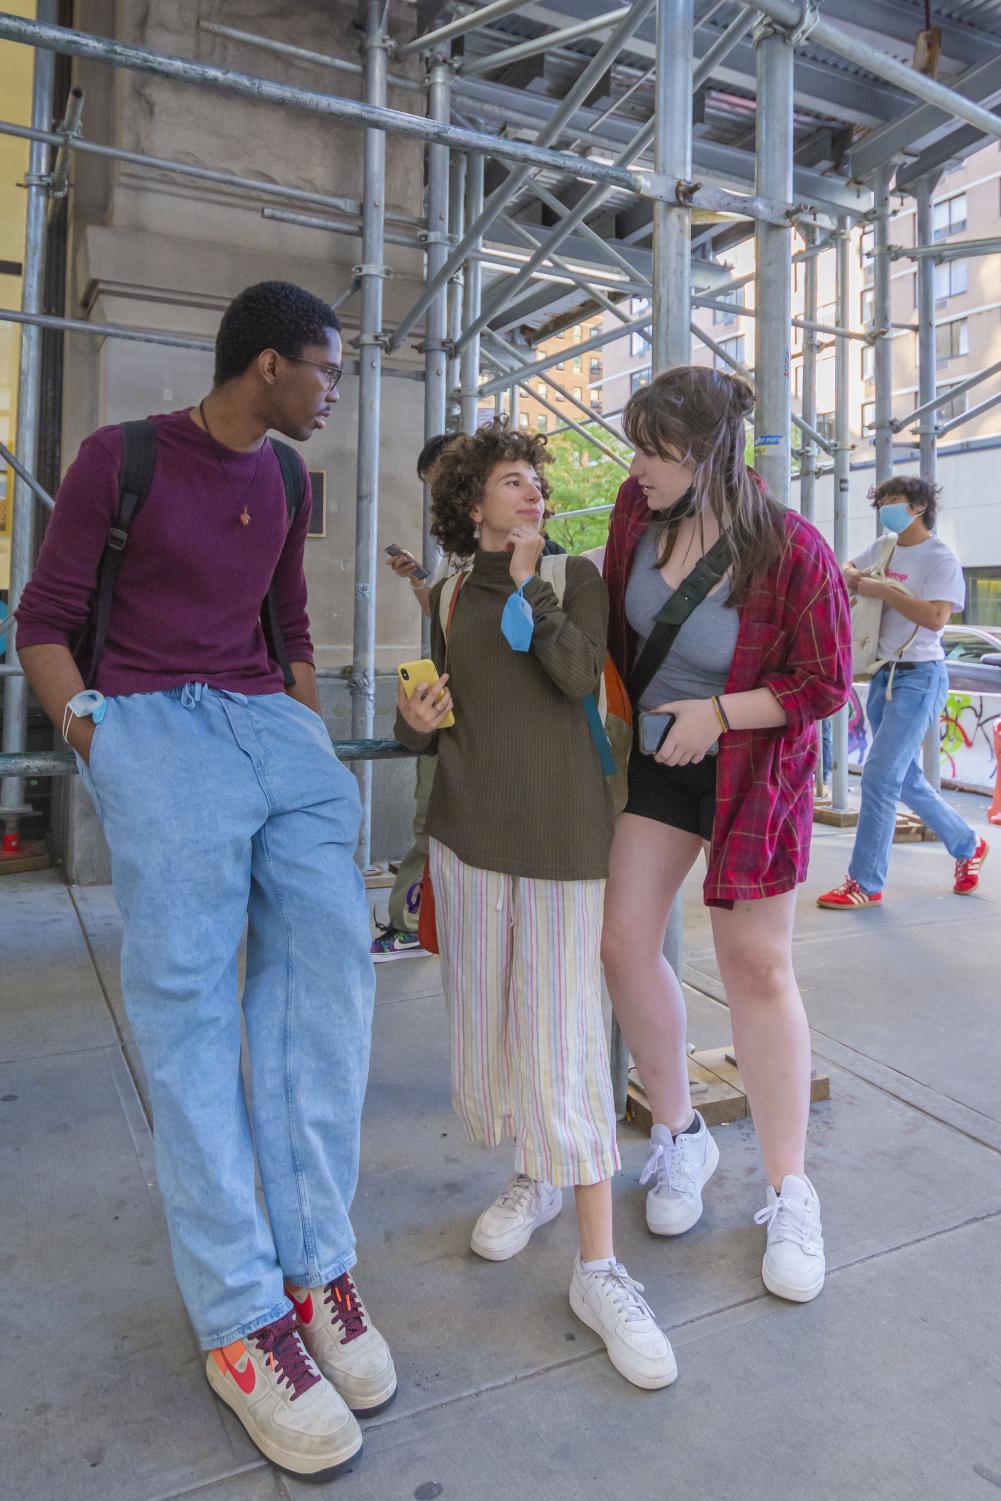 Ahmad Goode (left), Michela Richards (middle) and Blake Chrusciel (right) have a conversation while leaning on scaffolding in front of Tisch. Ahmad is wearing a dark magenta sweater and baggy blue jeans. Michela is wearing an olive turtleneck sweater and linen pants with vertical pastel stripes. Blake is wearing a gray tank top, red plaid dress shirt and black shorts.